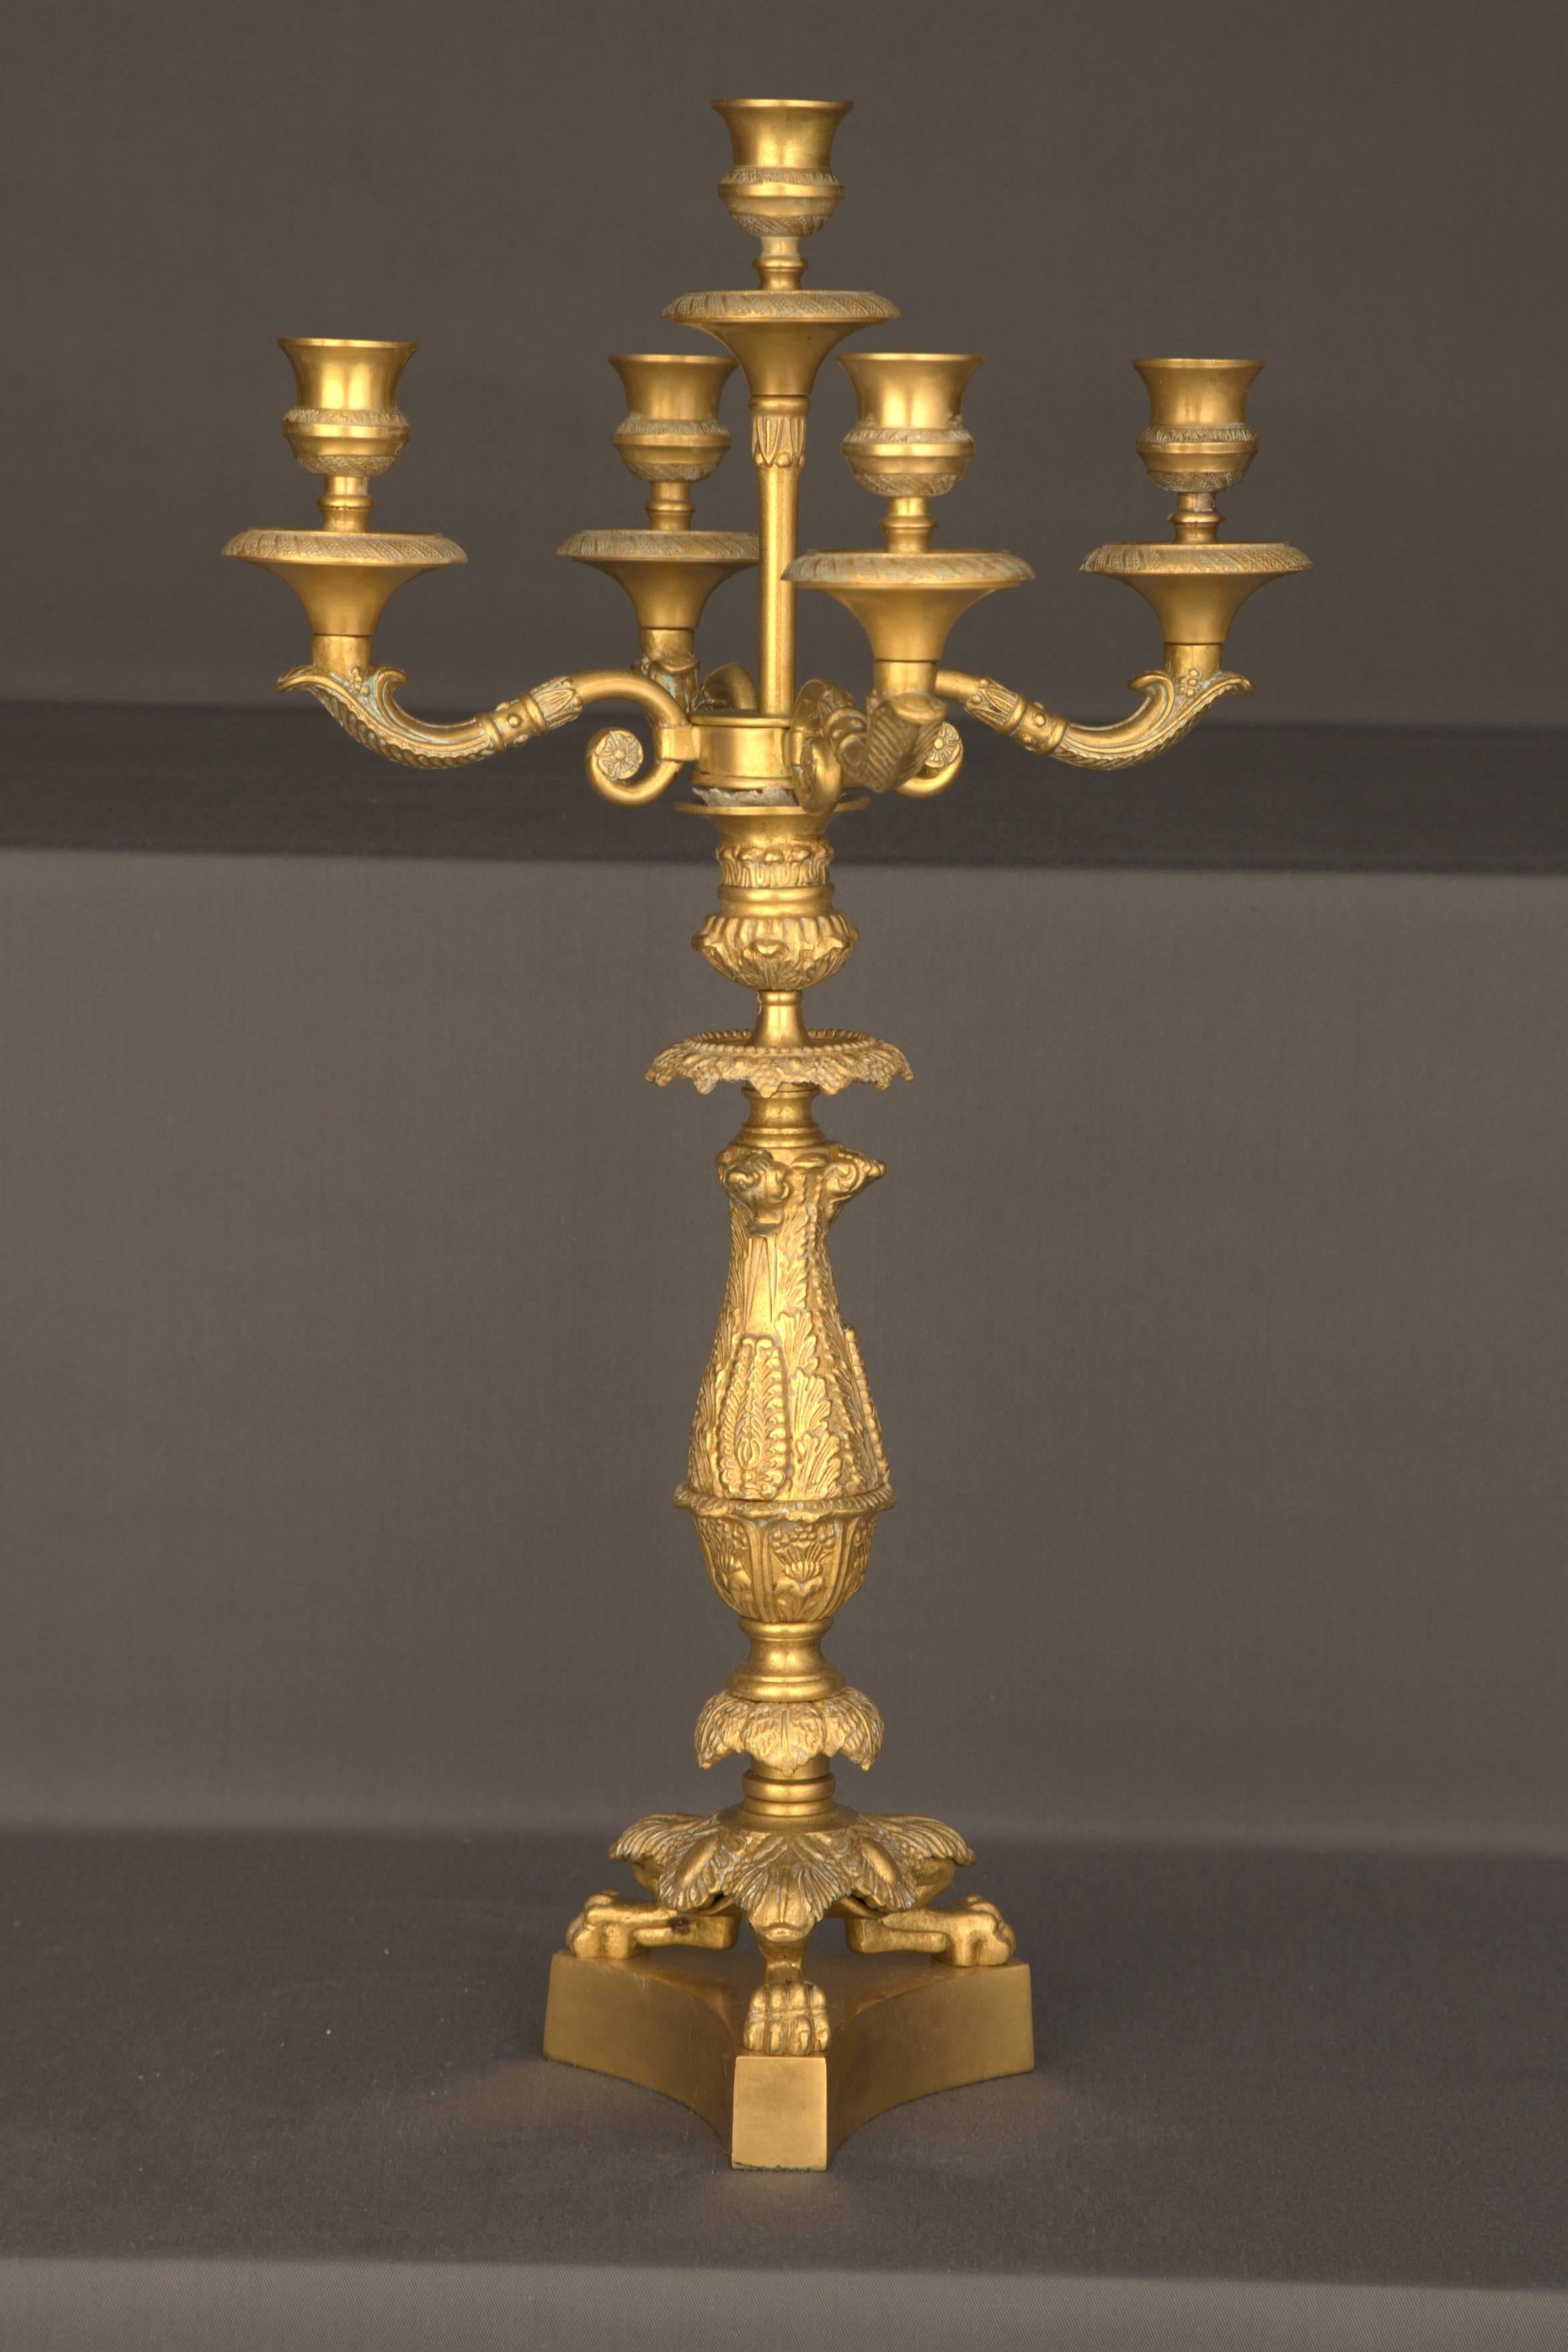 Bronze, finely engraved. Column-shaft as holder for four Sweeping
candelabra arms. Diameter: 30 cm, height: 52 cm.